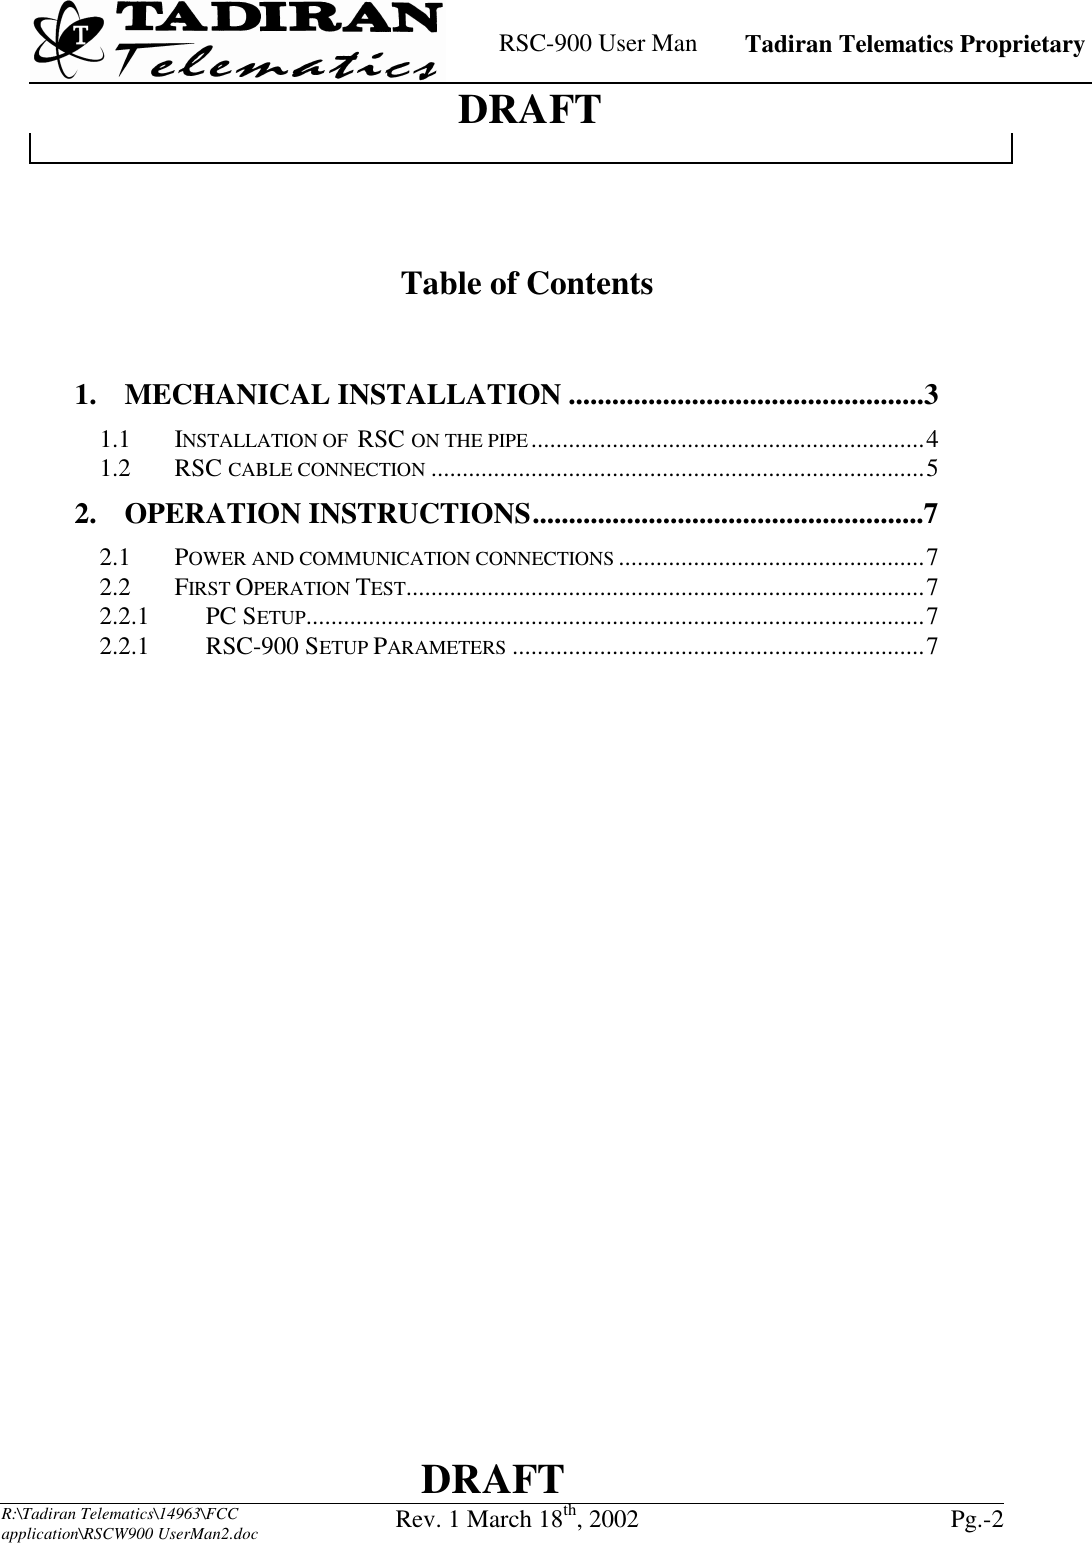    RSC-900 User Man   Tadiran Telematics Proprietary    DRAFT  DRAFT  R:\Tadiran Telematics\14963\FCC application\RSCW900 UserMan2.doc Rev. 1 March 18th, 2002  Pg.-2      Table of Contents   1. MECHANICAL INSTALLATION .................................................3 1.1 INSTALLATION OF  RSC ON THE PIPE...............................................................4 1.2 RSC CABLE CONNECTION ...............................................................................5 2. OPERATION INSTRUCTIONS......................................................7 2.1 POWER AND COMMUNICATION CONNECTIONS .................................................7 2.2 FIRST OPERATION TEST...................................................................................7 2.2.1   PC SETUP...................................................................................................7 2.2.1   RSC-900 SETUP PARAMETERS ..................................................................7  